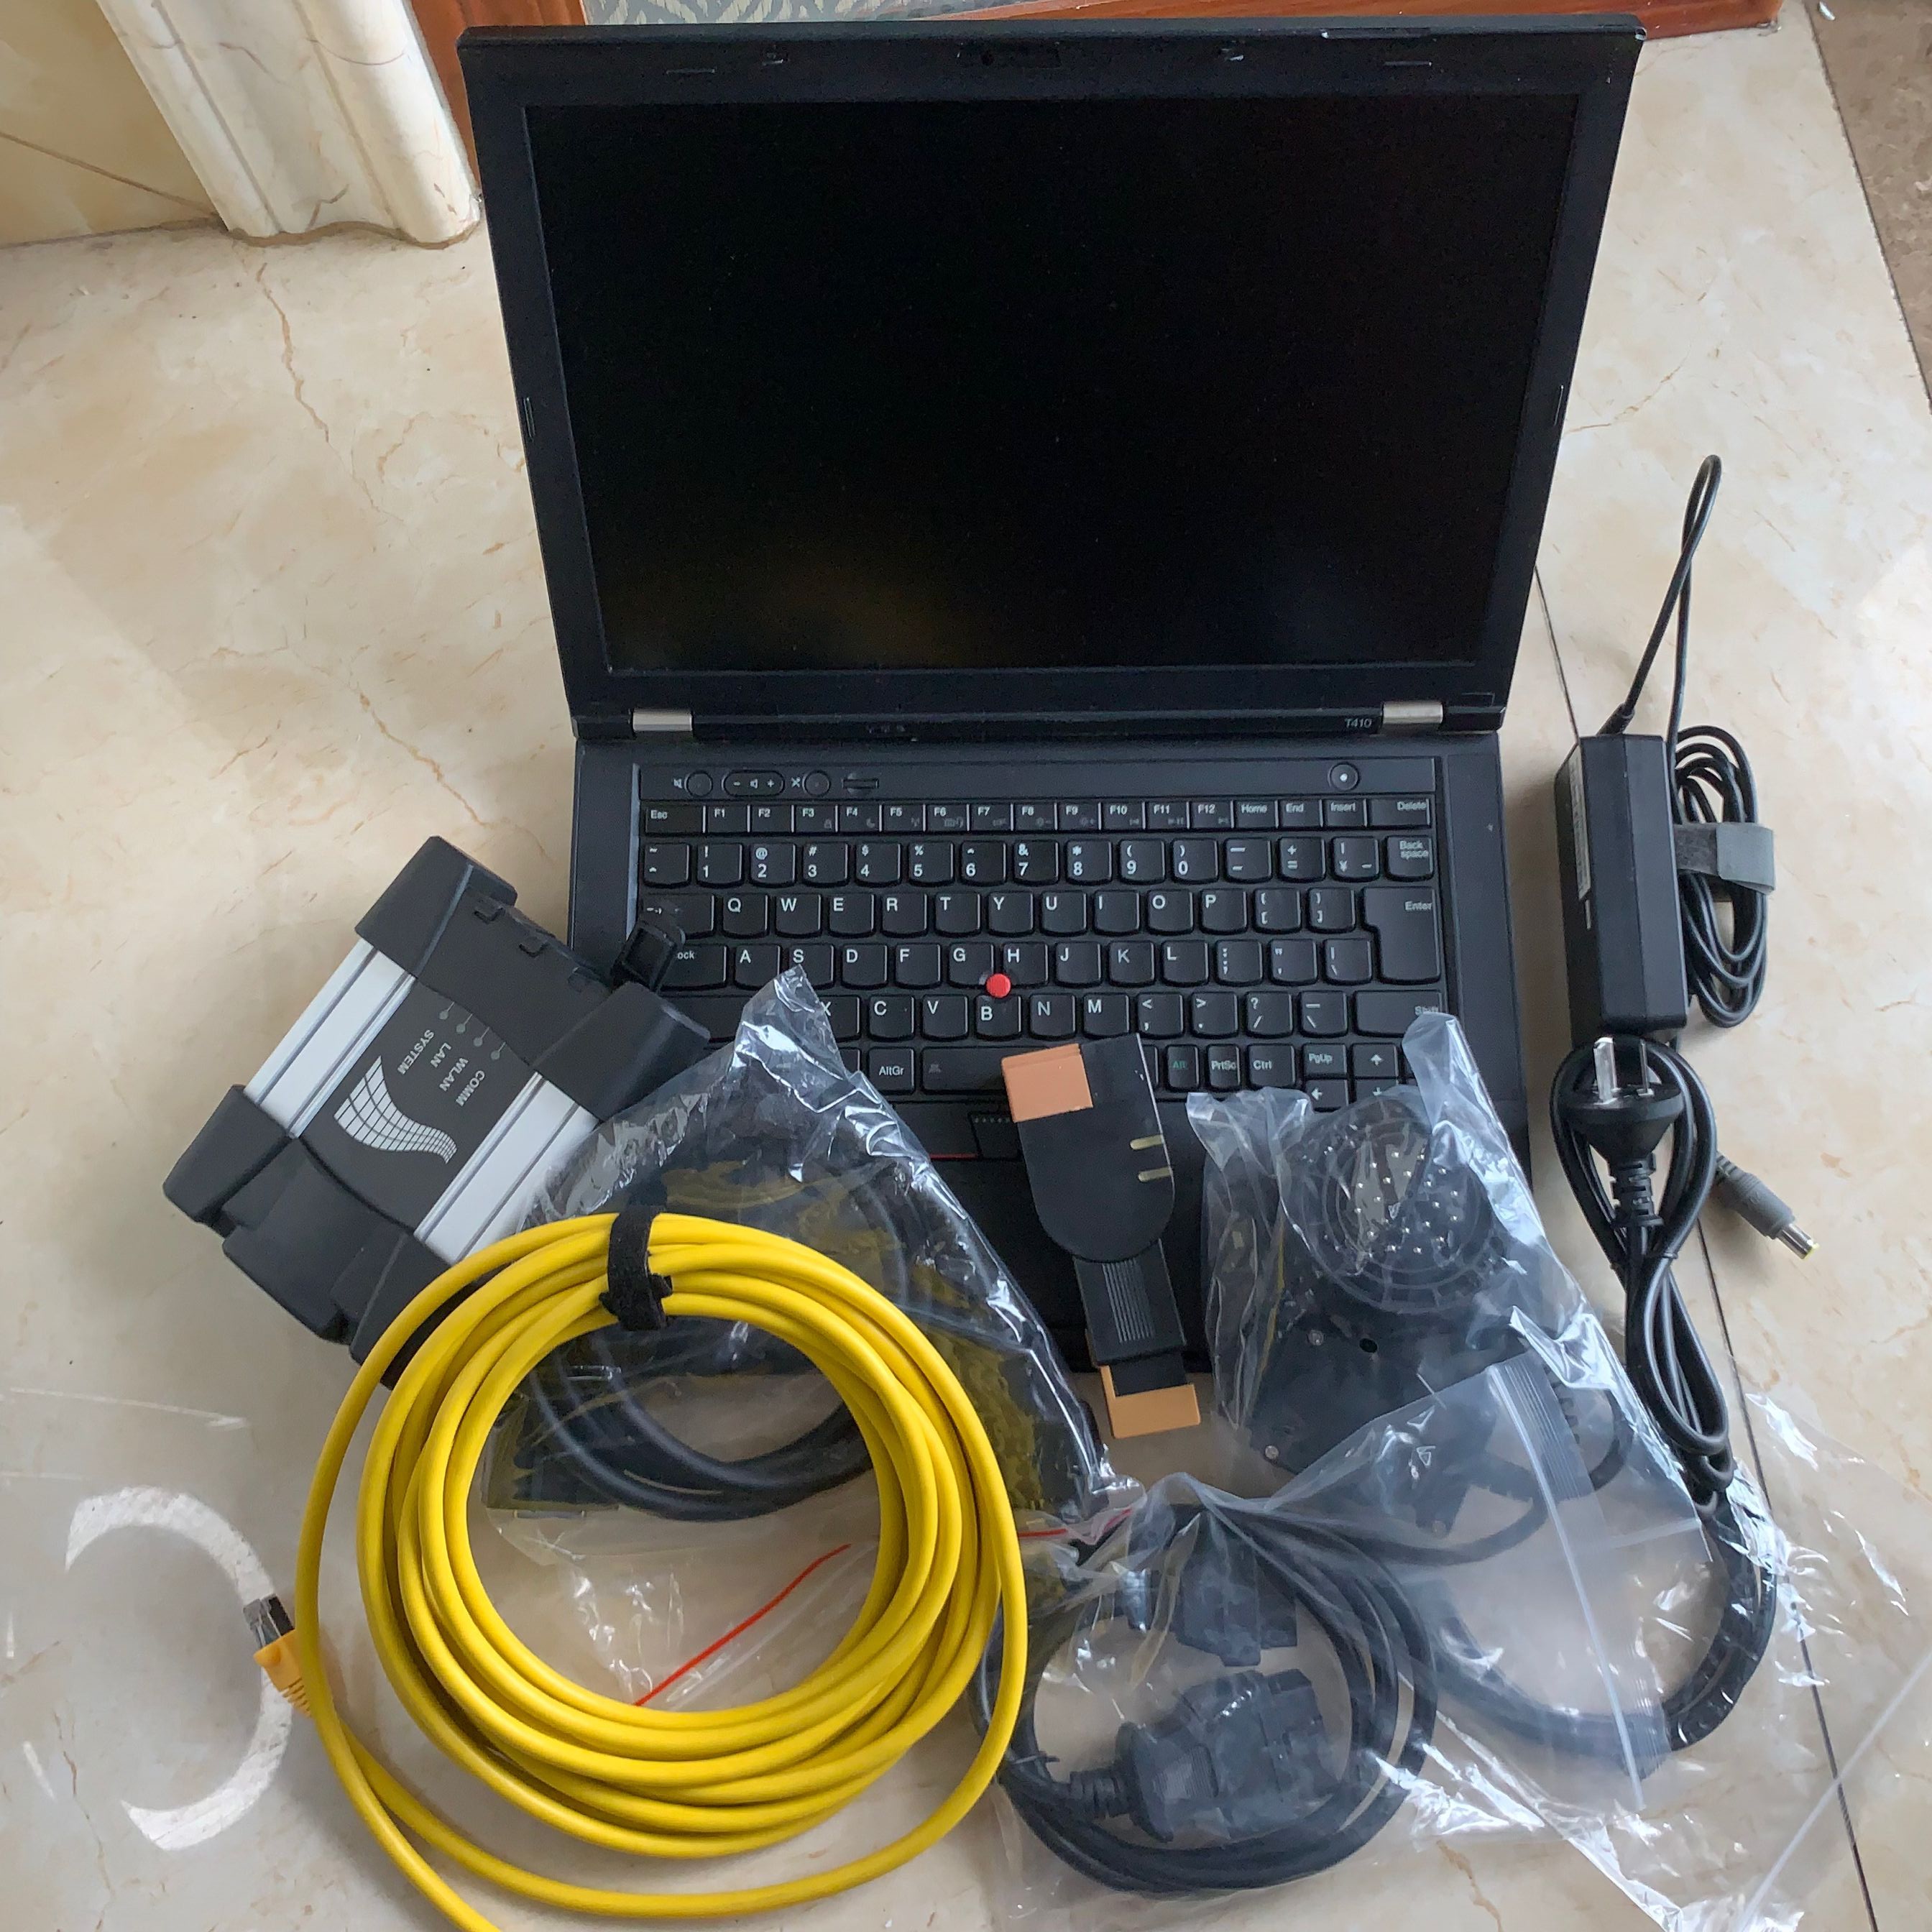 For BMW ICOM Next Auto diagnosis Tools Code Scanner with t410 I7 CPU 4G Used Second hand Laptop 1TB HDD V06.2024 S//oft-ware 3in1 Ready to Work